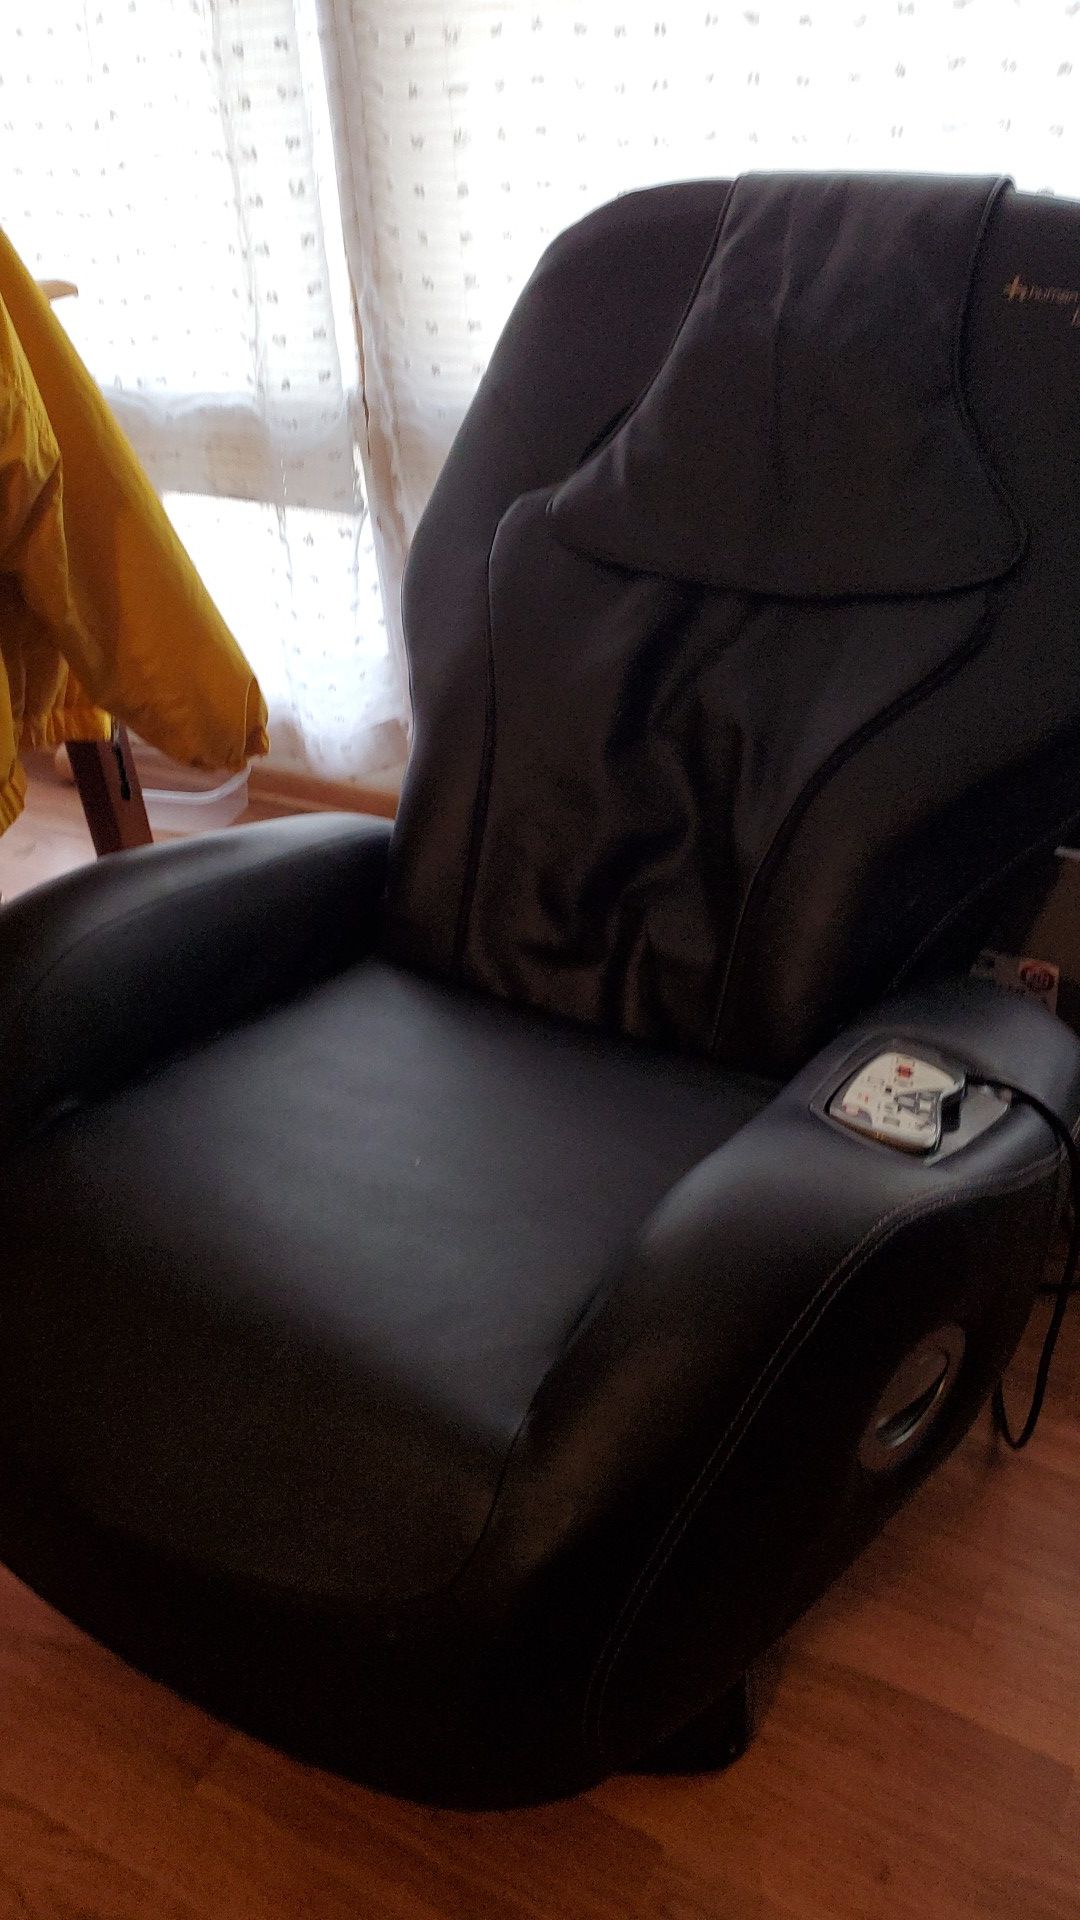 Human Touch iJoy Massage Chair {contact info removed}